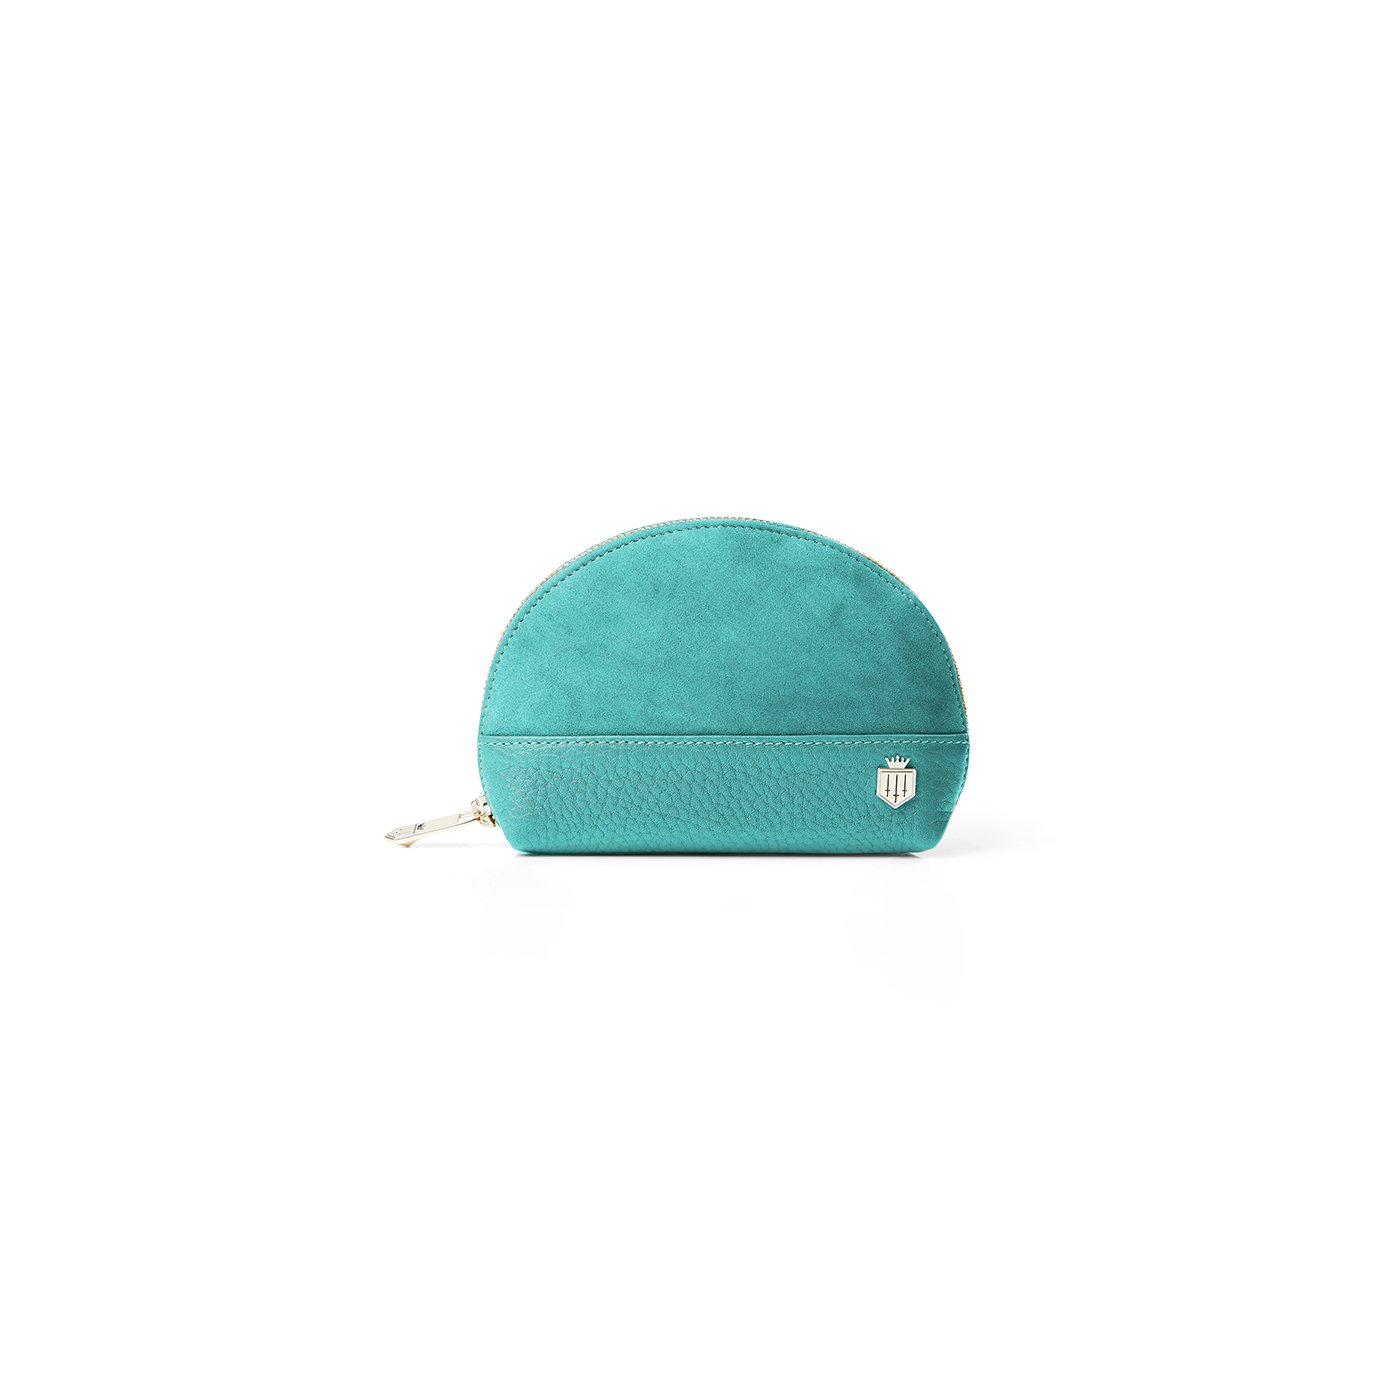 Fairfax And Favor Chiltern Coin Purse Turquoise